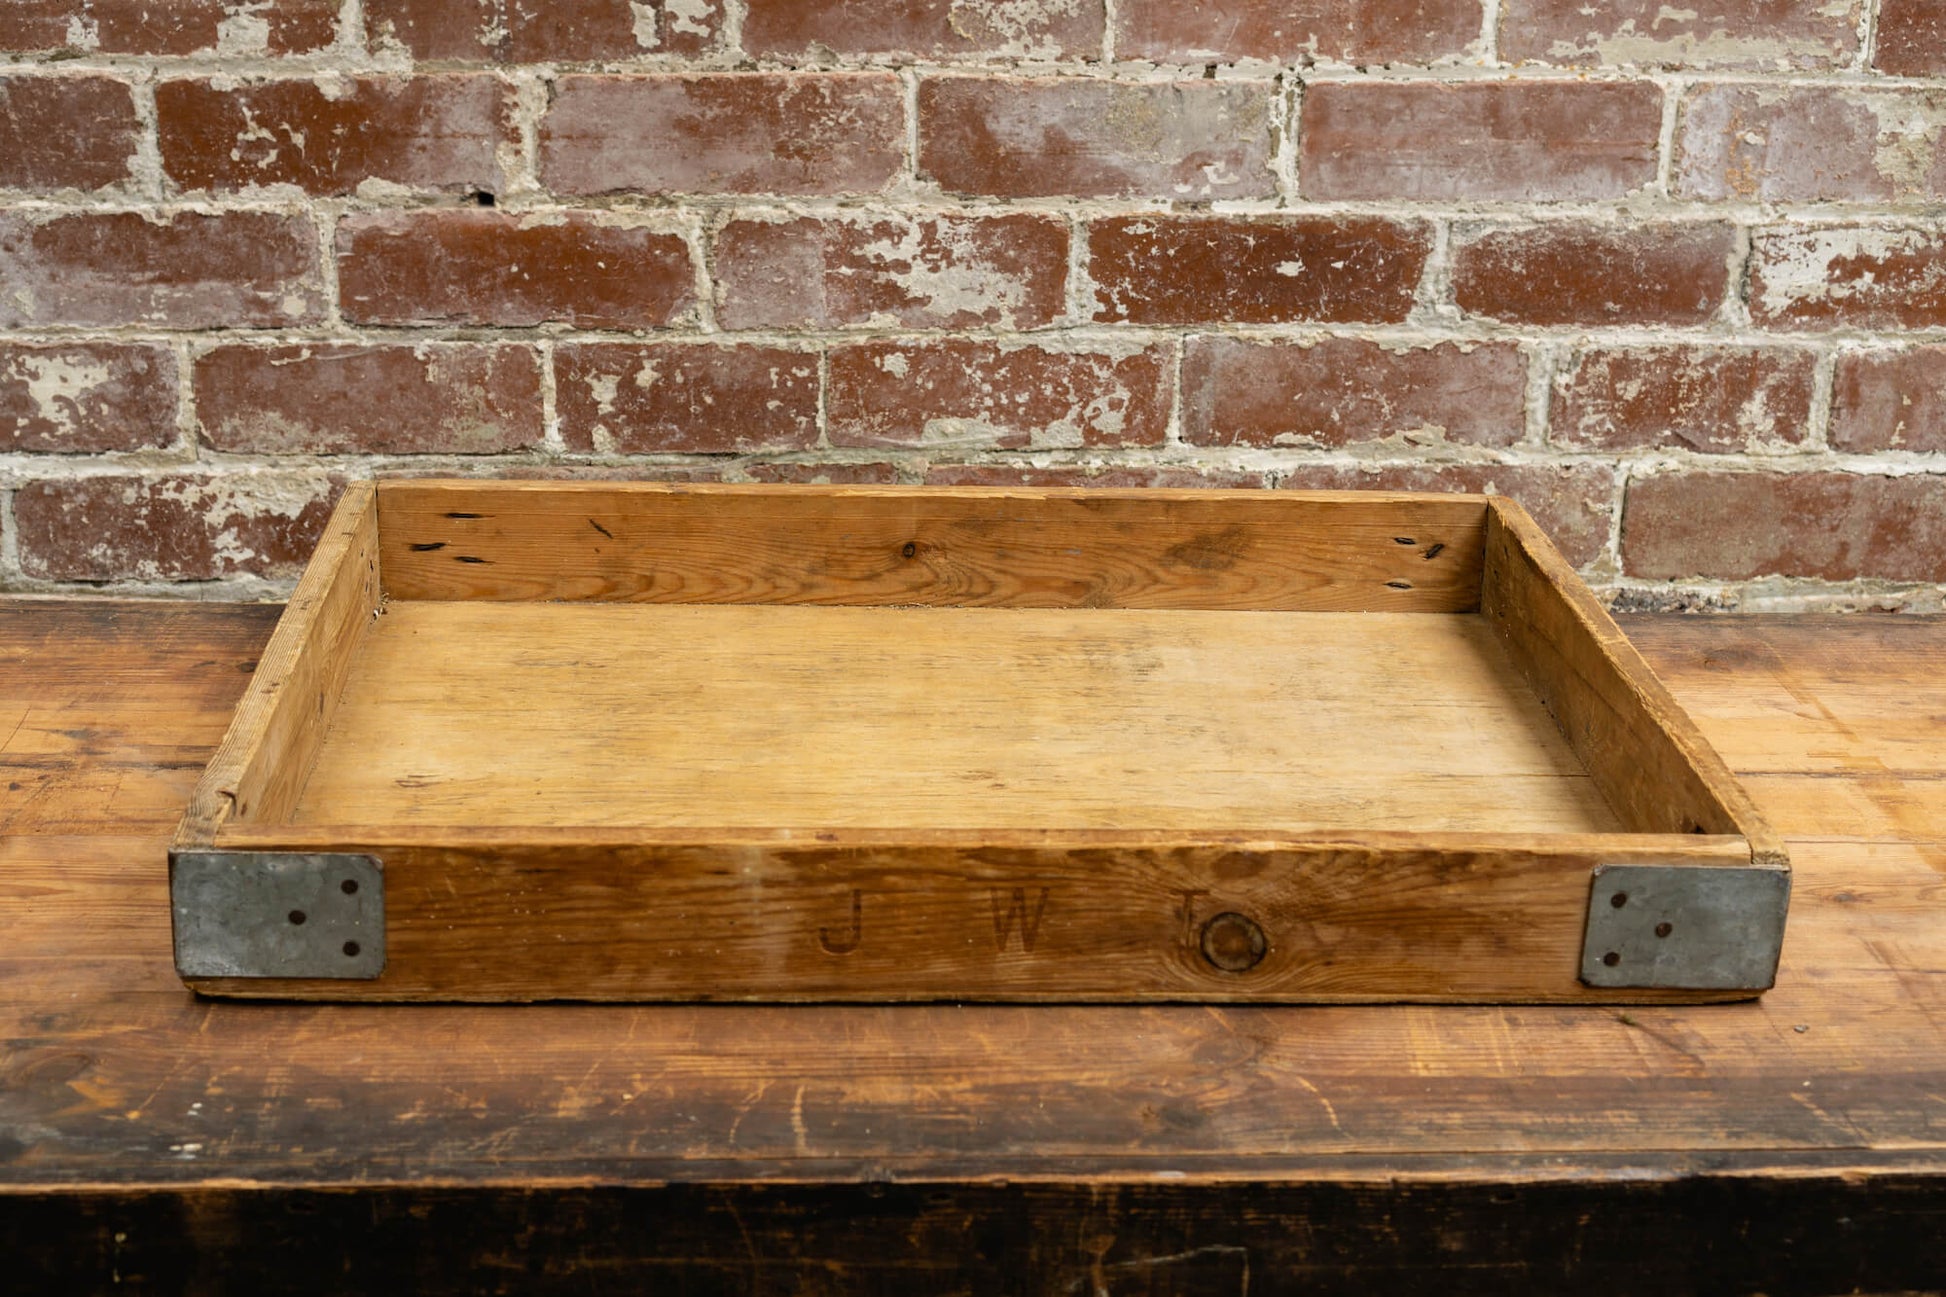 Photo shows a vintage selection of wooden seed trays atop a table. The background is a red rustic brick wall.